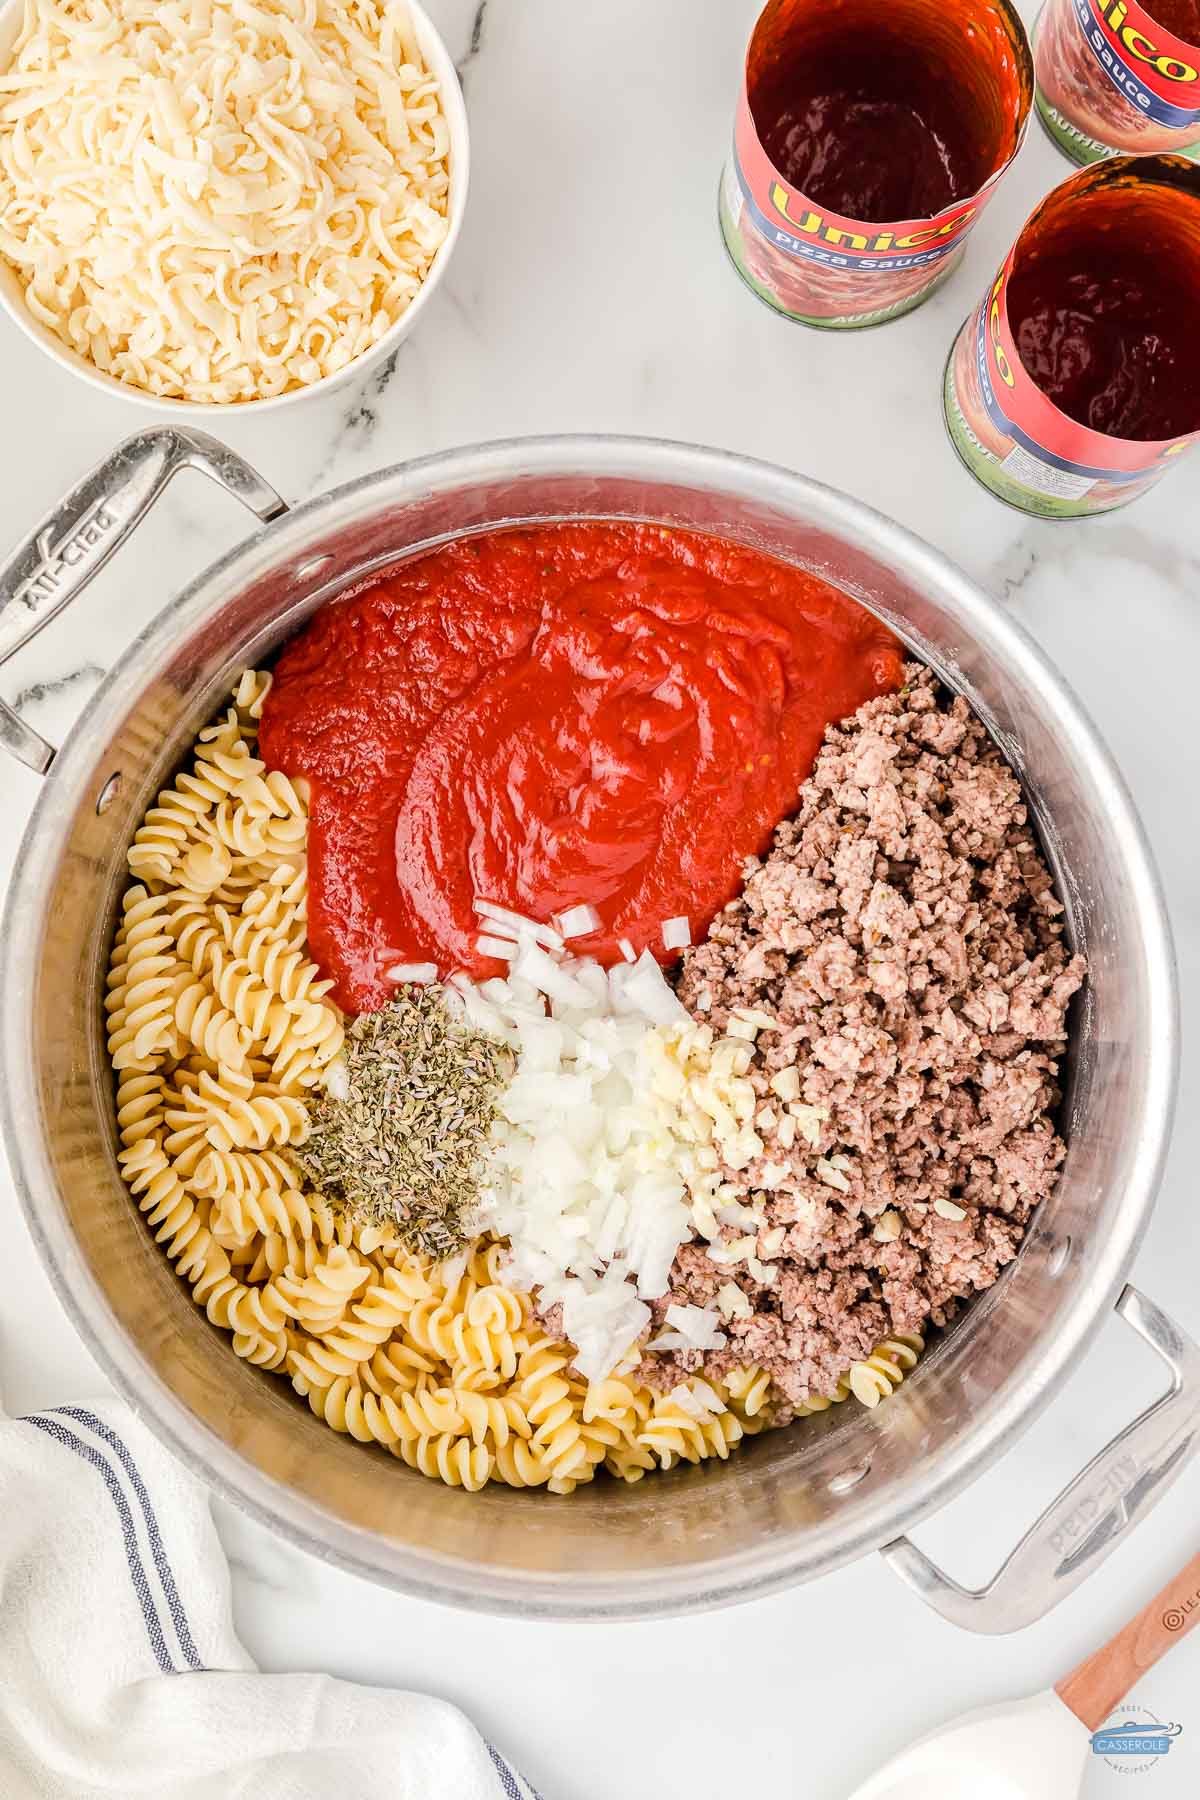 pasta, sauce, spices, and meat in a pot